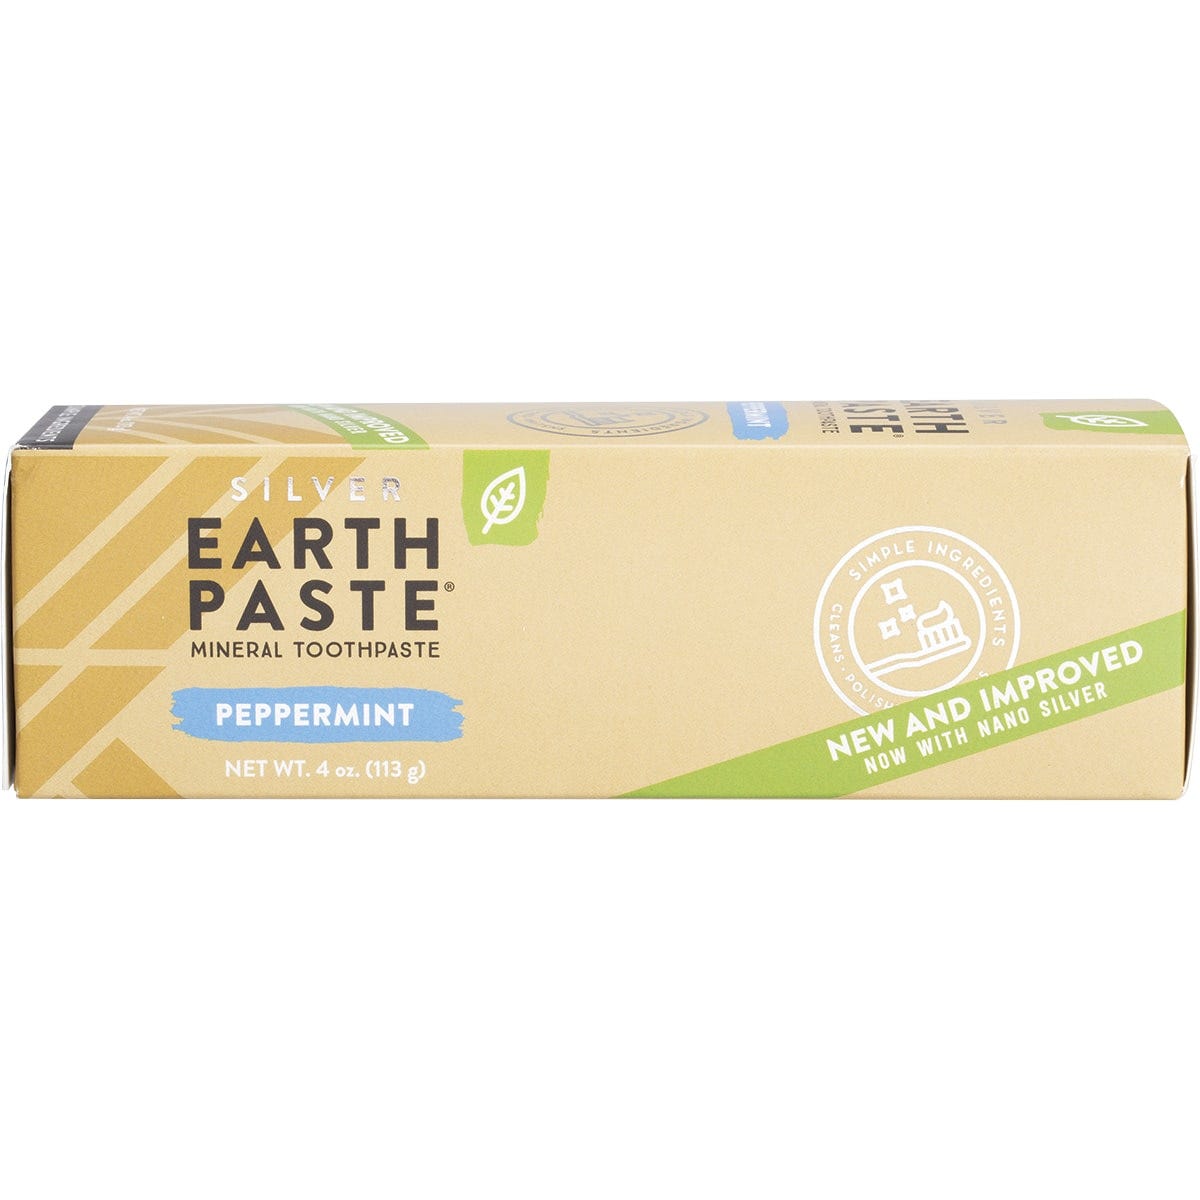 Redmond Earthpaste Toothpaste with Silver Peppermint